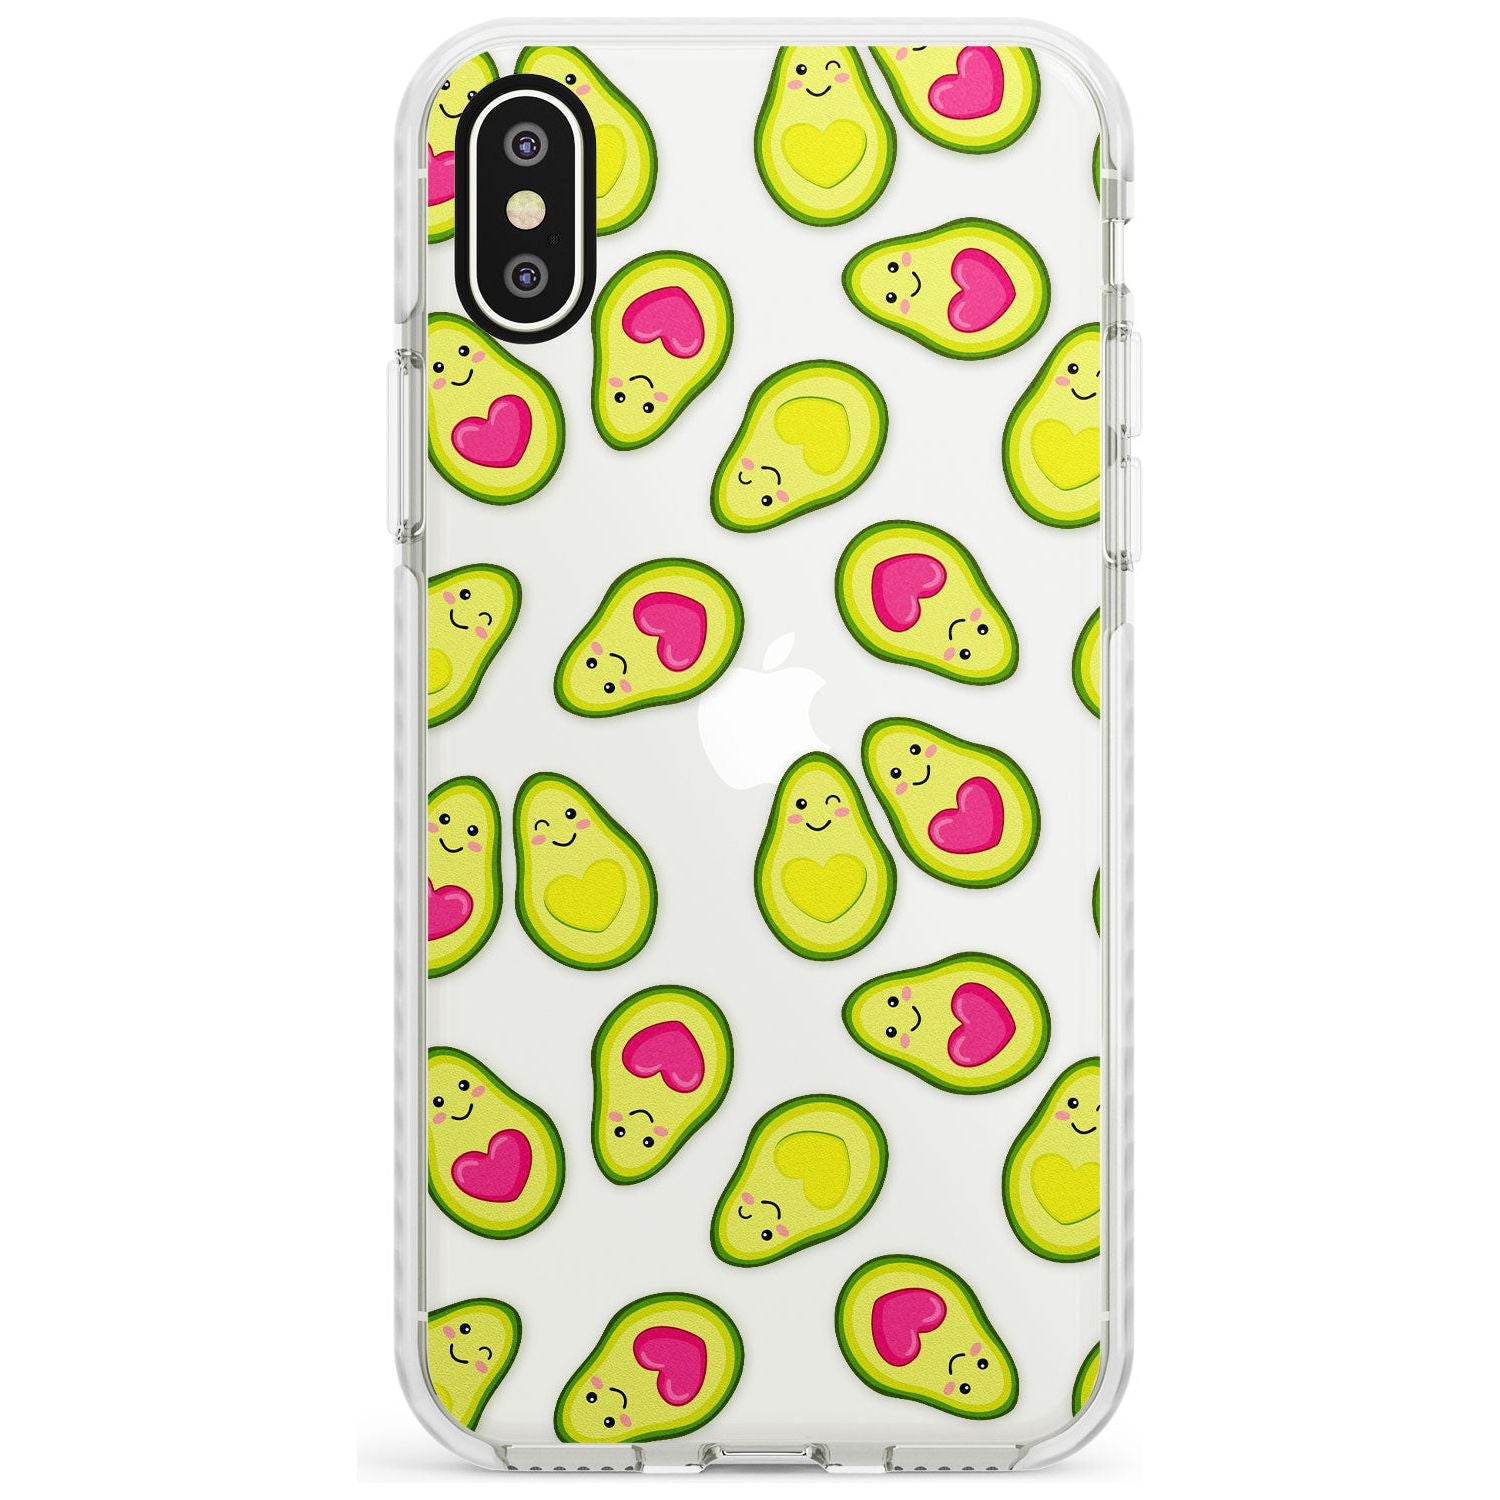 Avocado Love Impact Phone Case for iPhone X XS Max XR